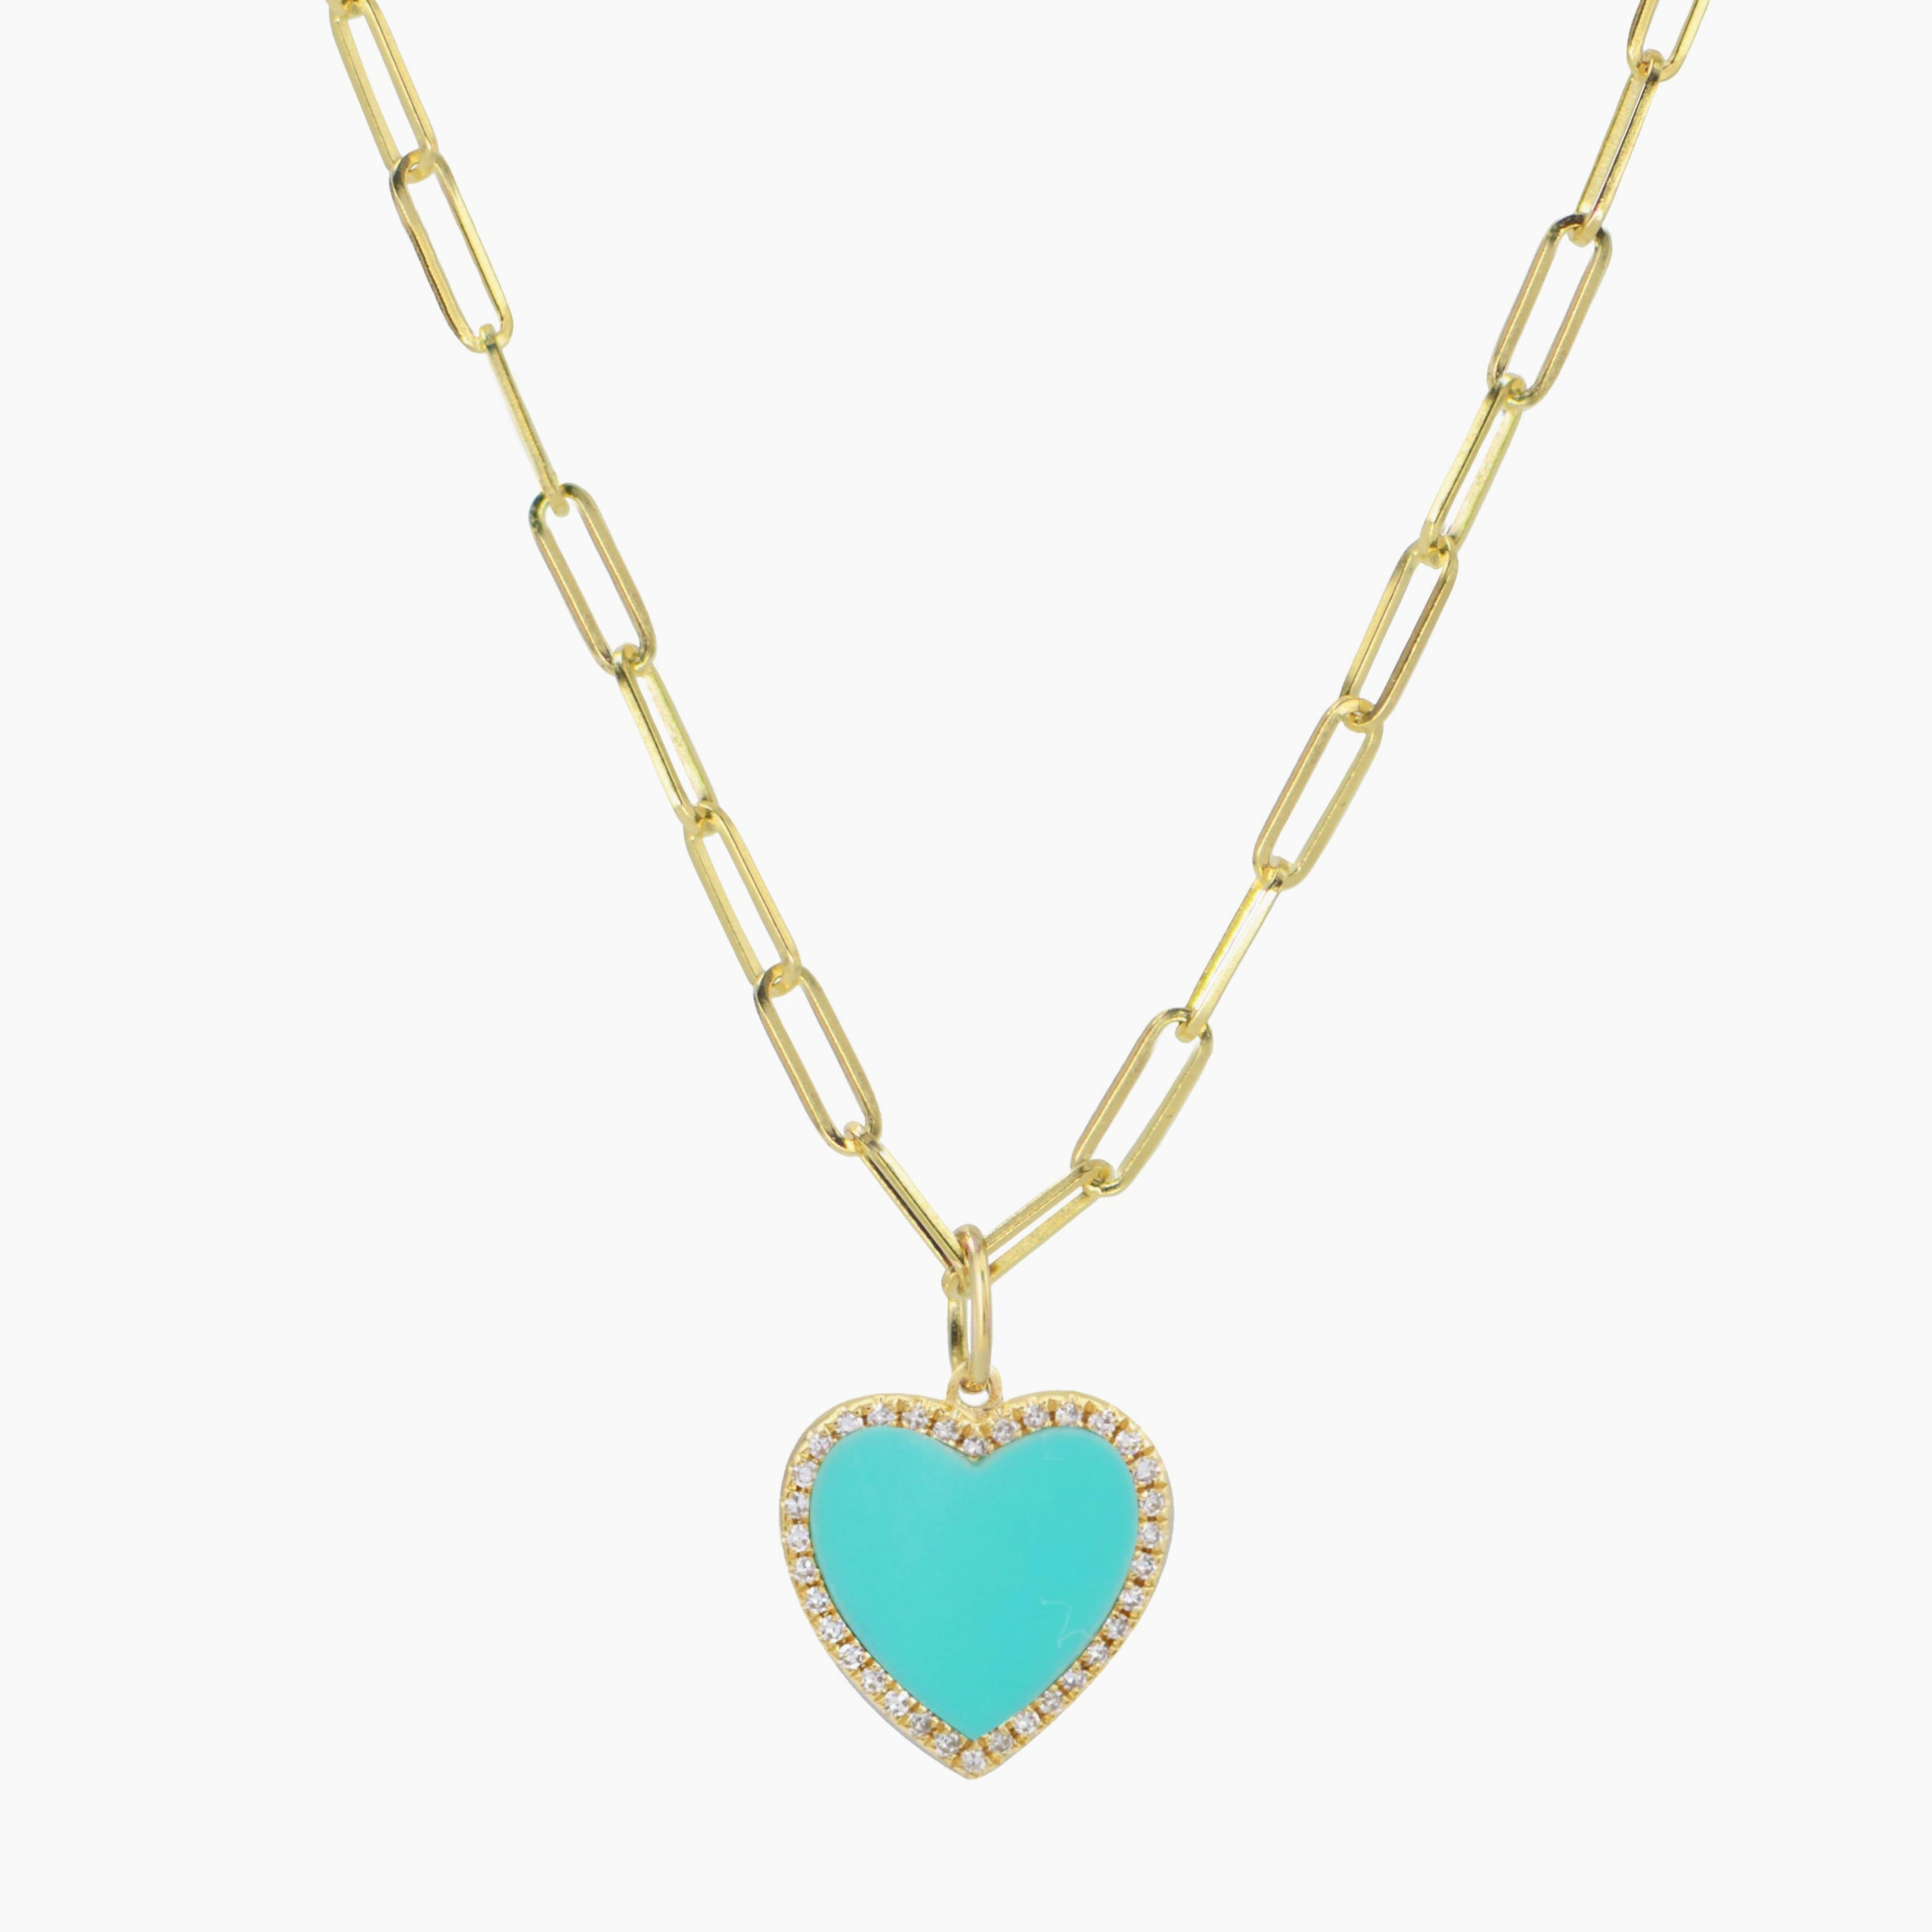 Turquoise Heart Necklace With Diamonds on Paperclip Link Chain